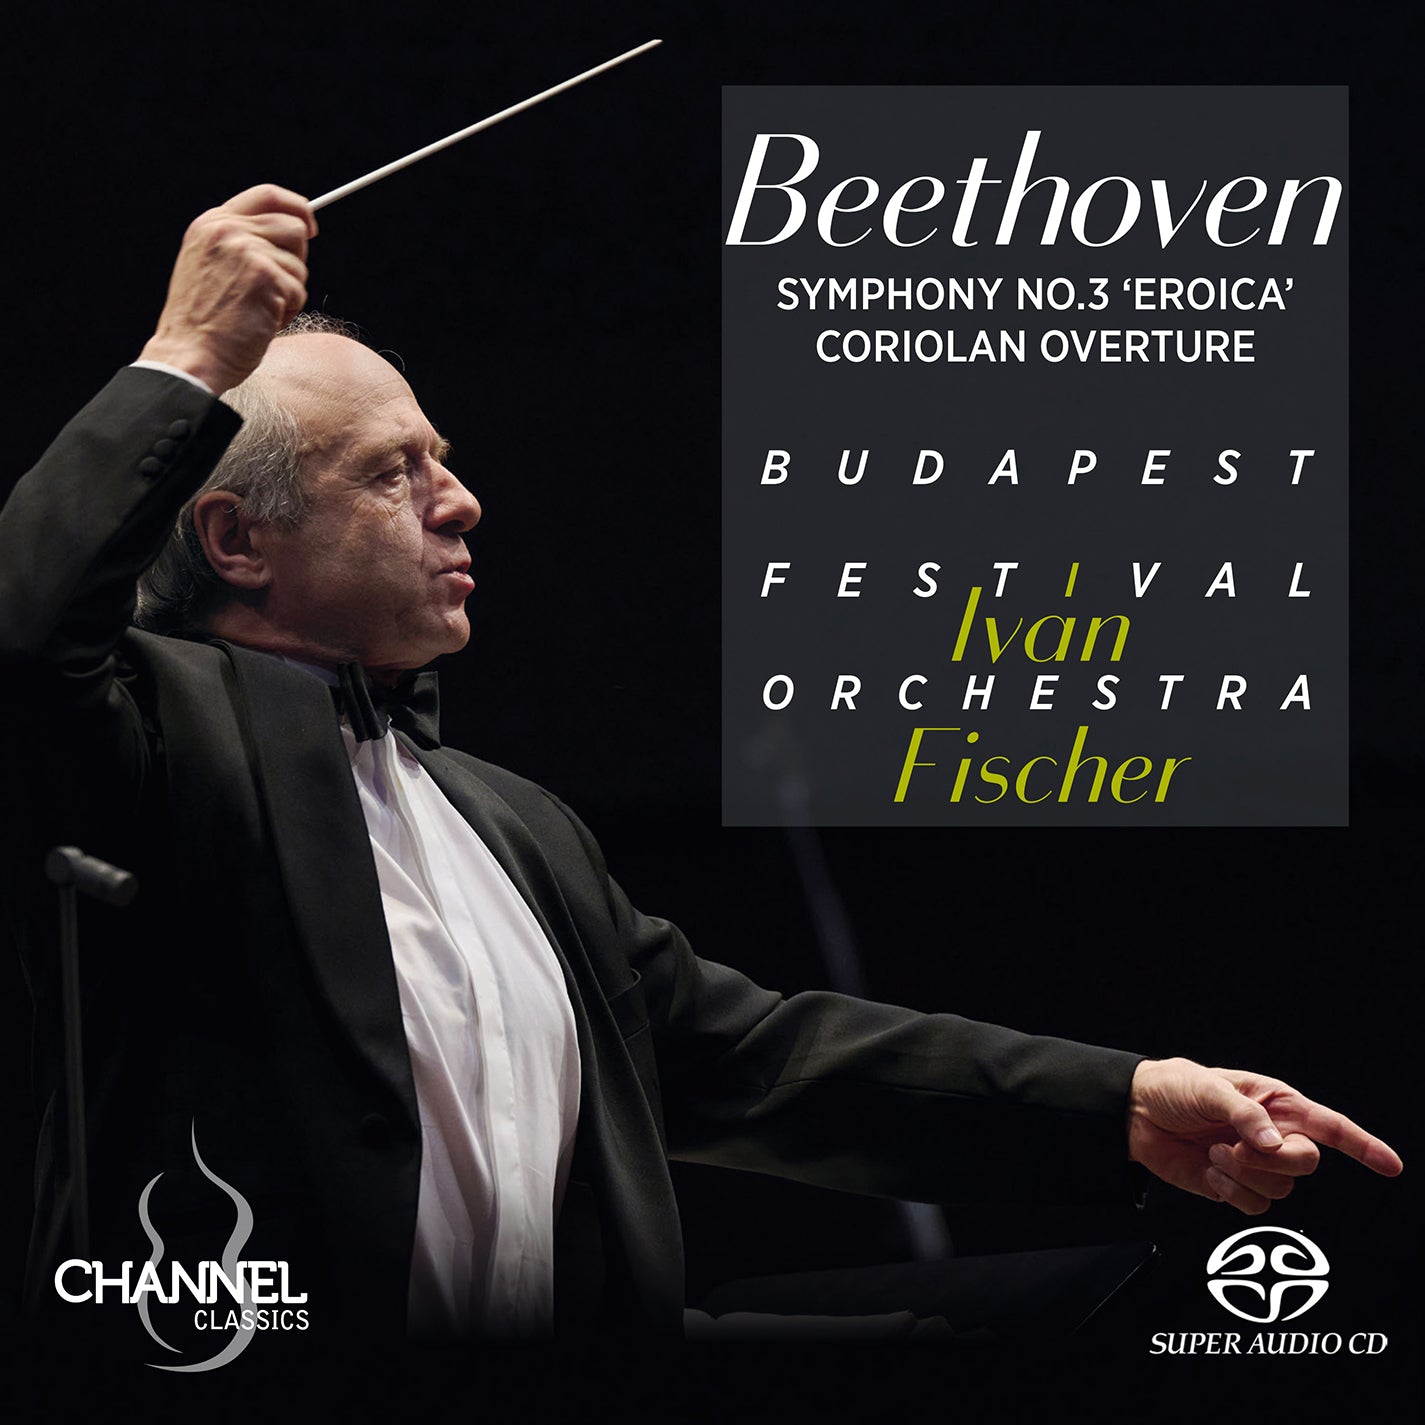 Beethoven: Symphony No. 3 "Eroica" / Fischer, Budapest Festival Orchestra